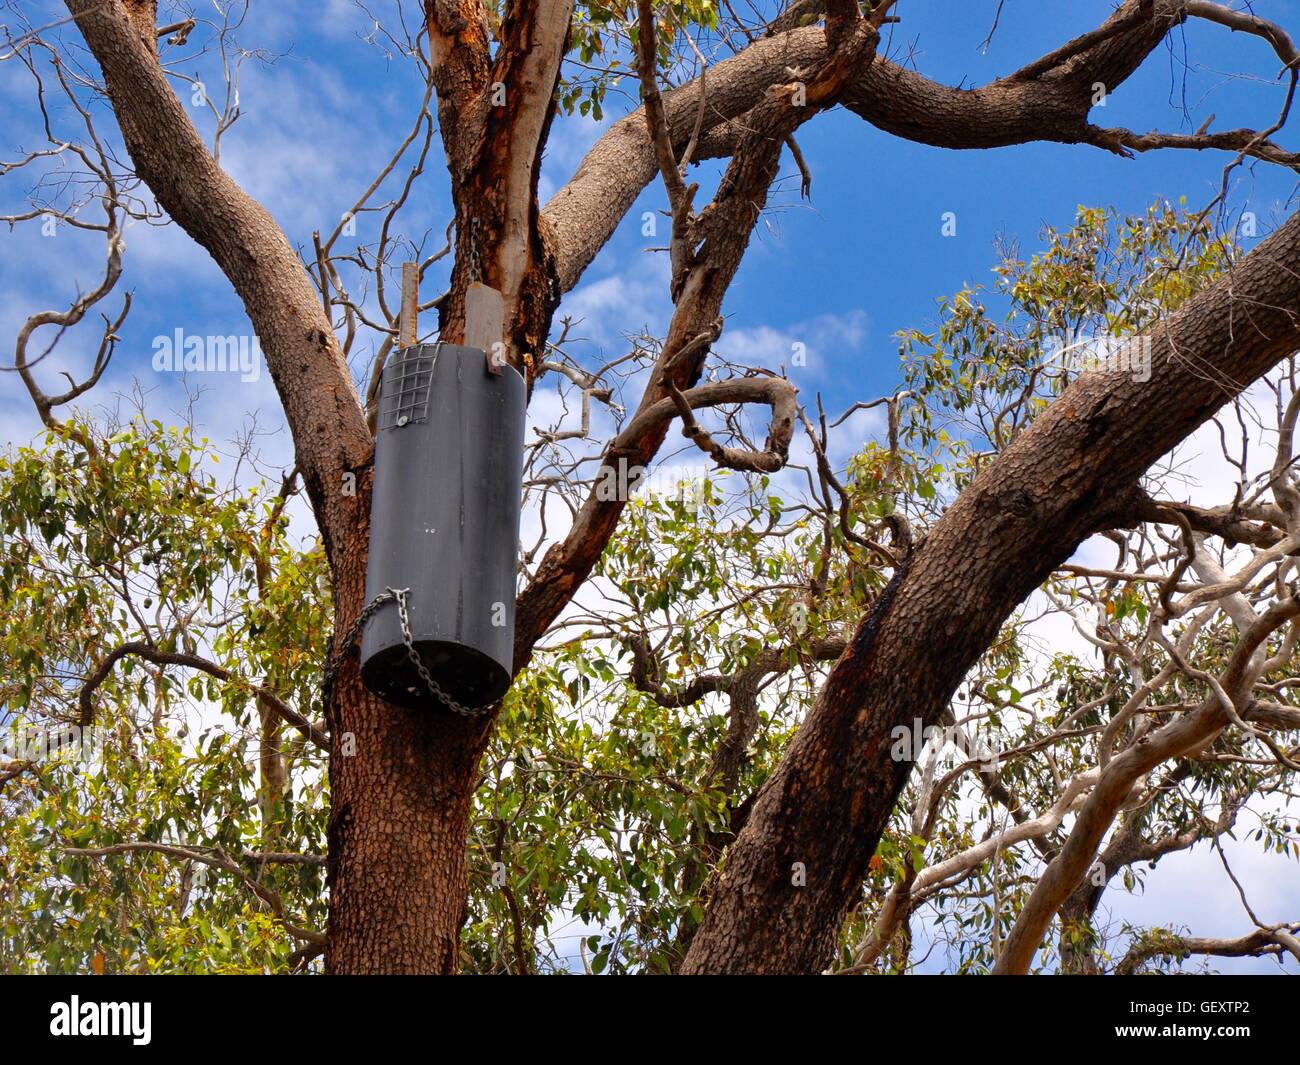 Gardener's tools hanging in cylindrical box in bushland tree at the Bibra Lake reserve under a blue sky in Western Australia. Stock Photo